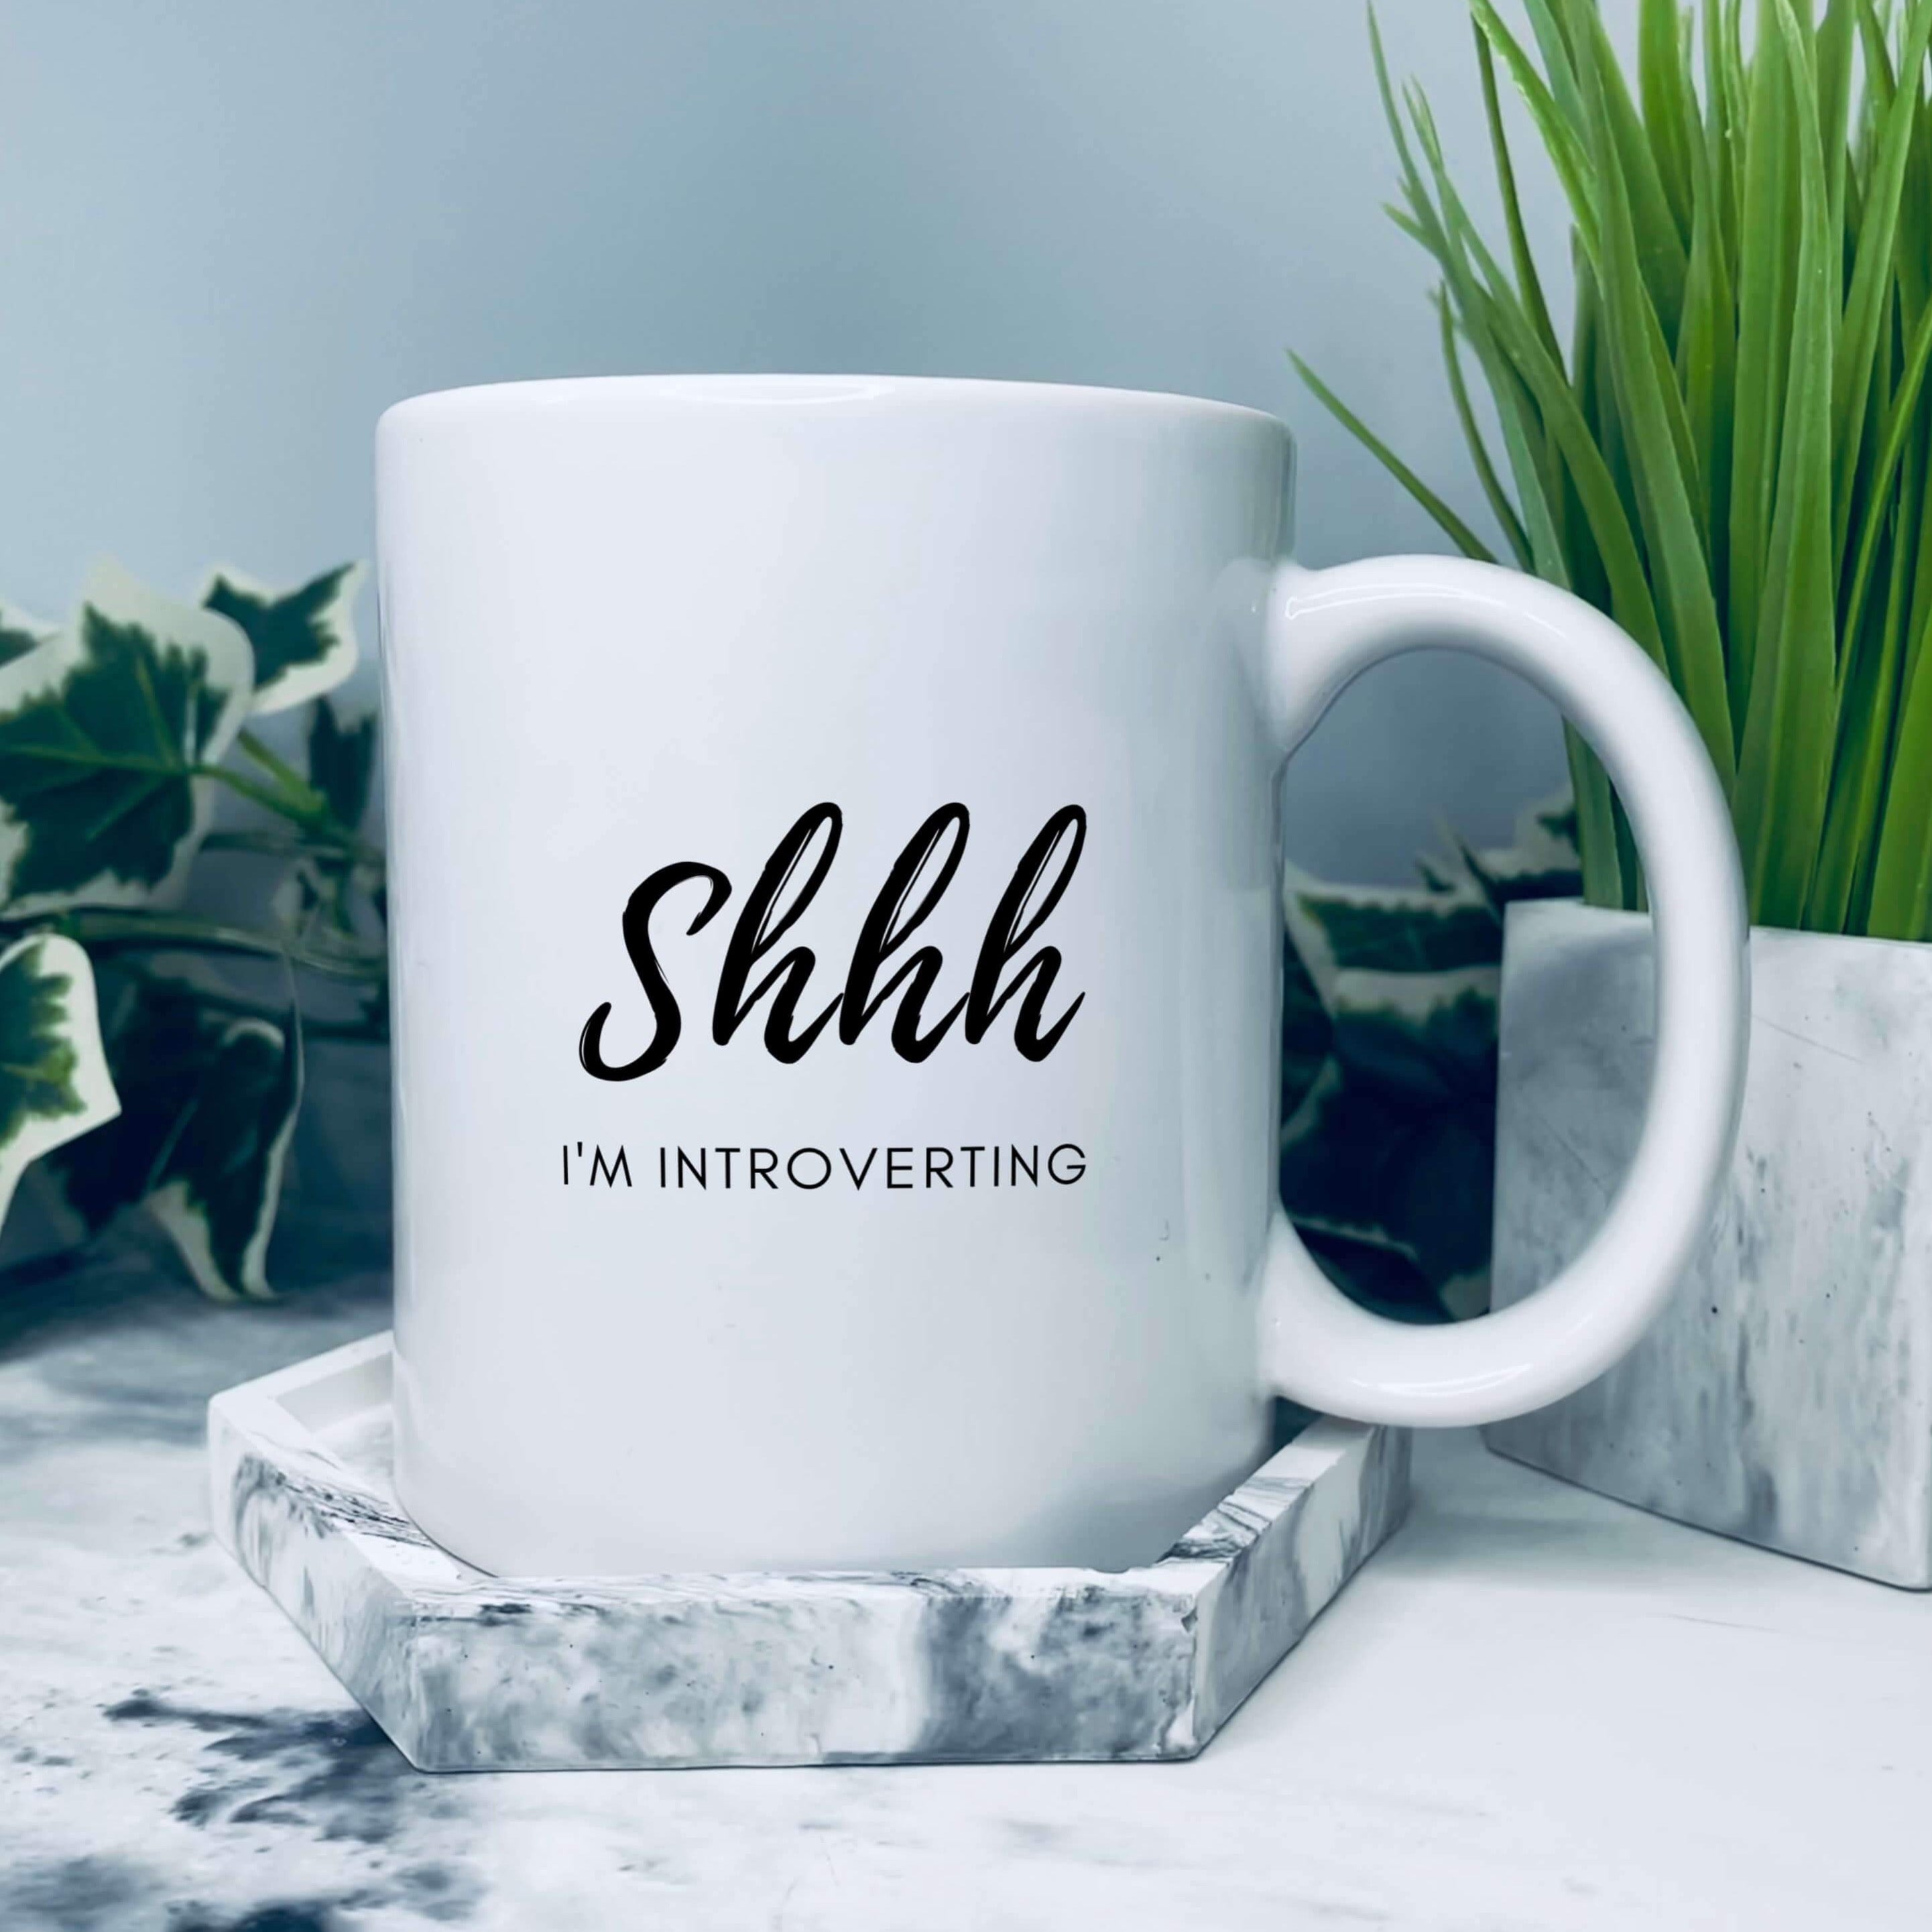 Mug that says: Shhh I'm introverting. Shhh is in large script text, and I'm introverting is in small sans serif text underneath